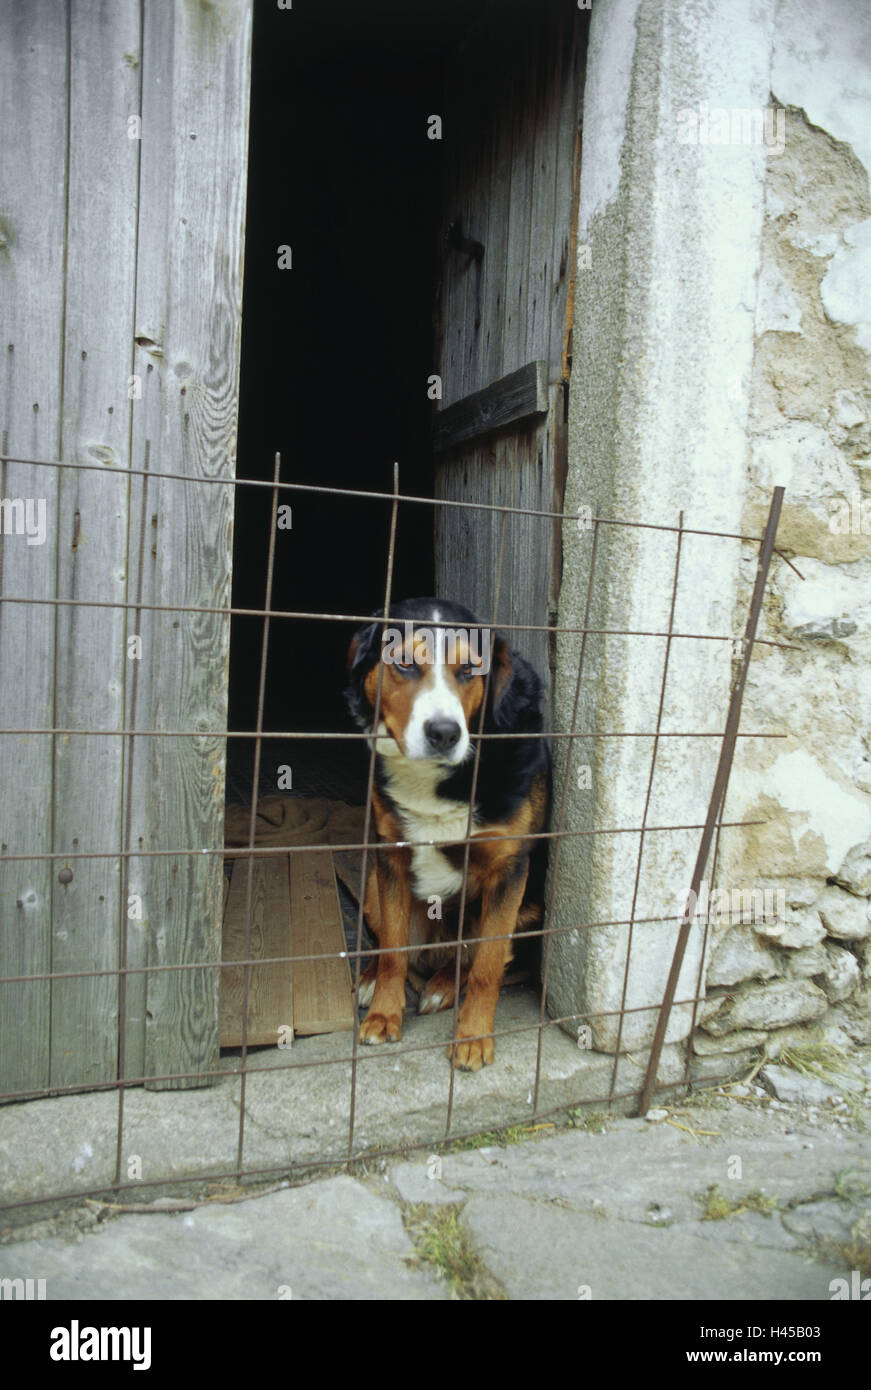 Farm, dog, grid, stable, court, stable building, door, bars, pet, watchdog, watchdog, sadly, locked up, bars, locking grids, Stock Photo